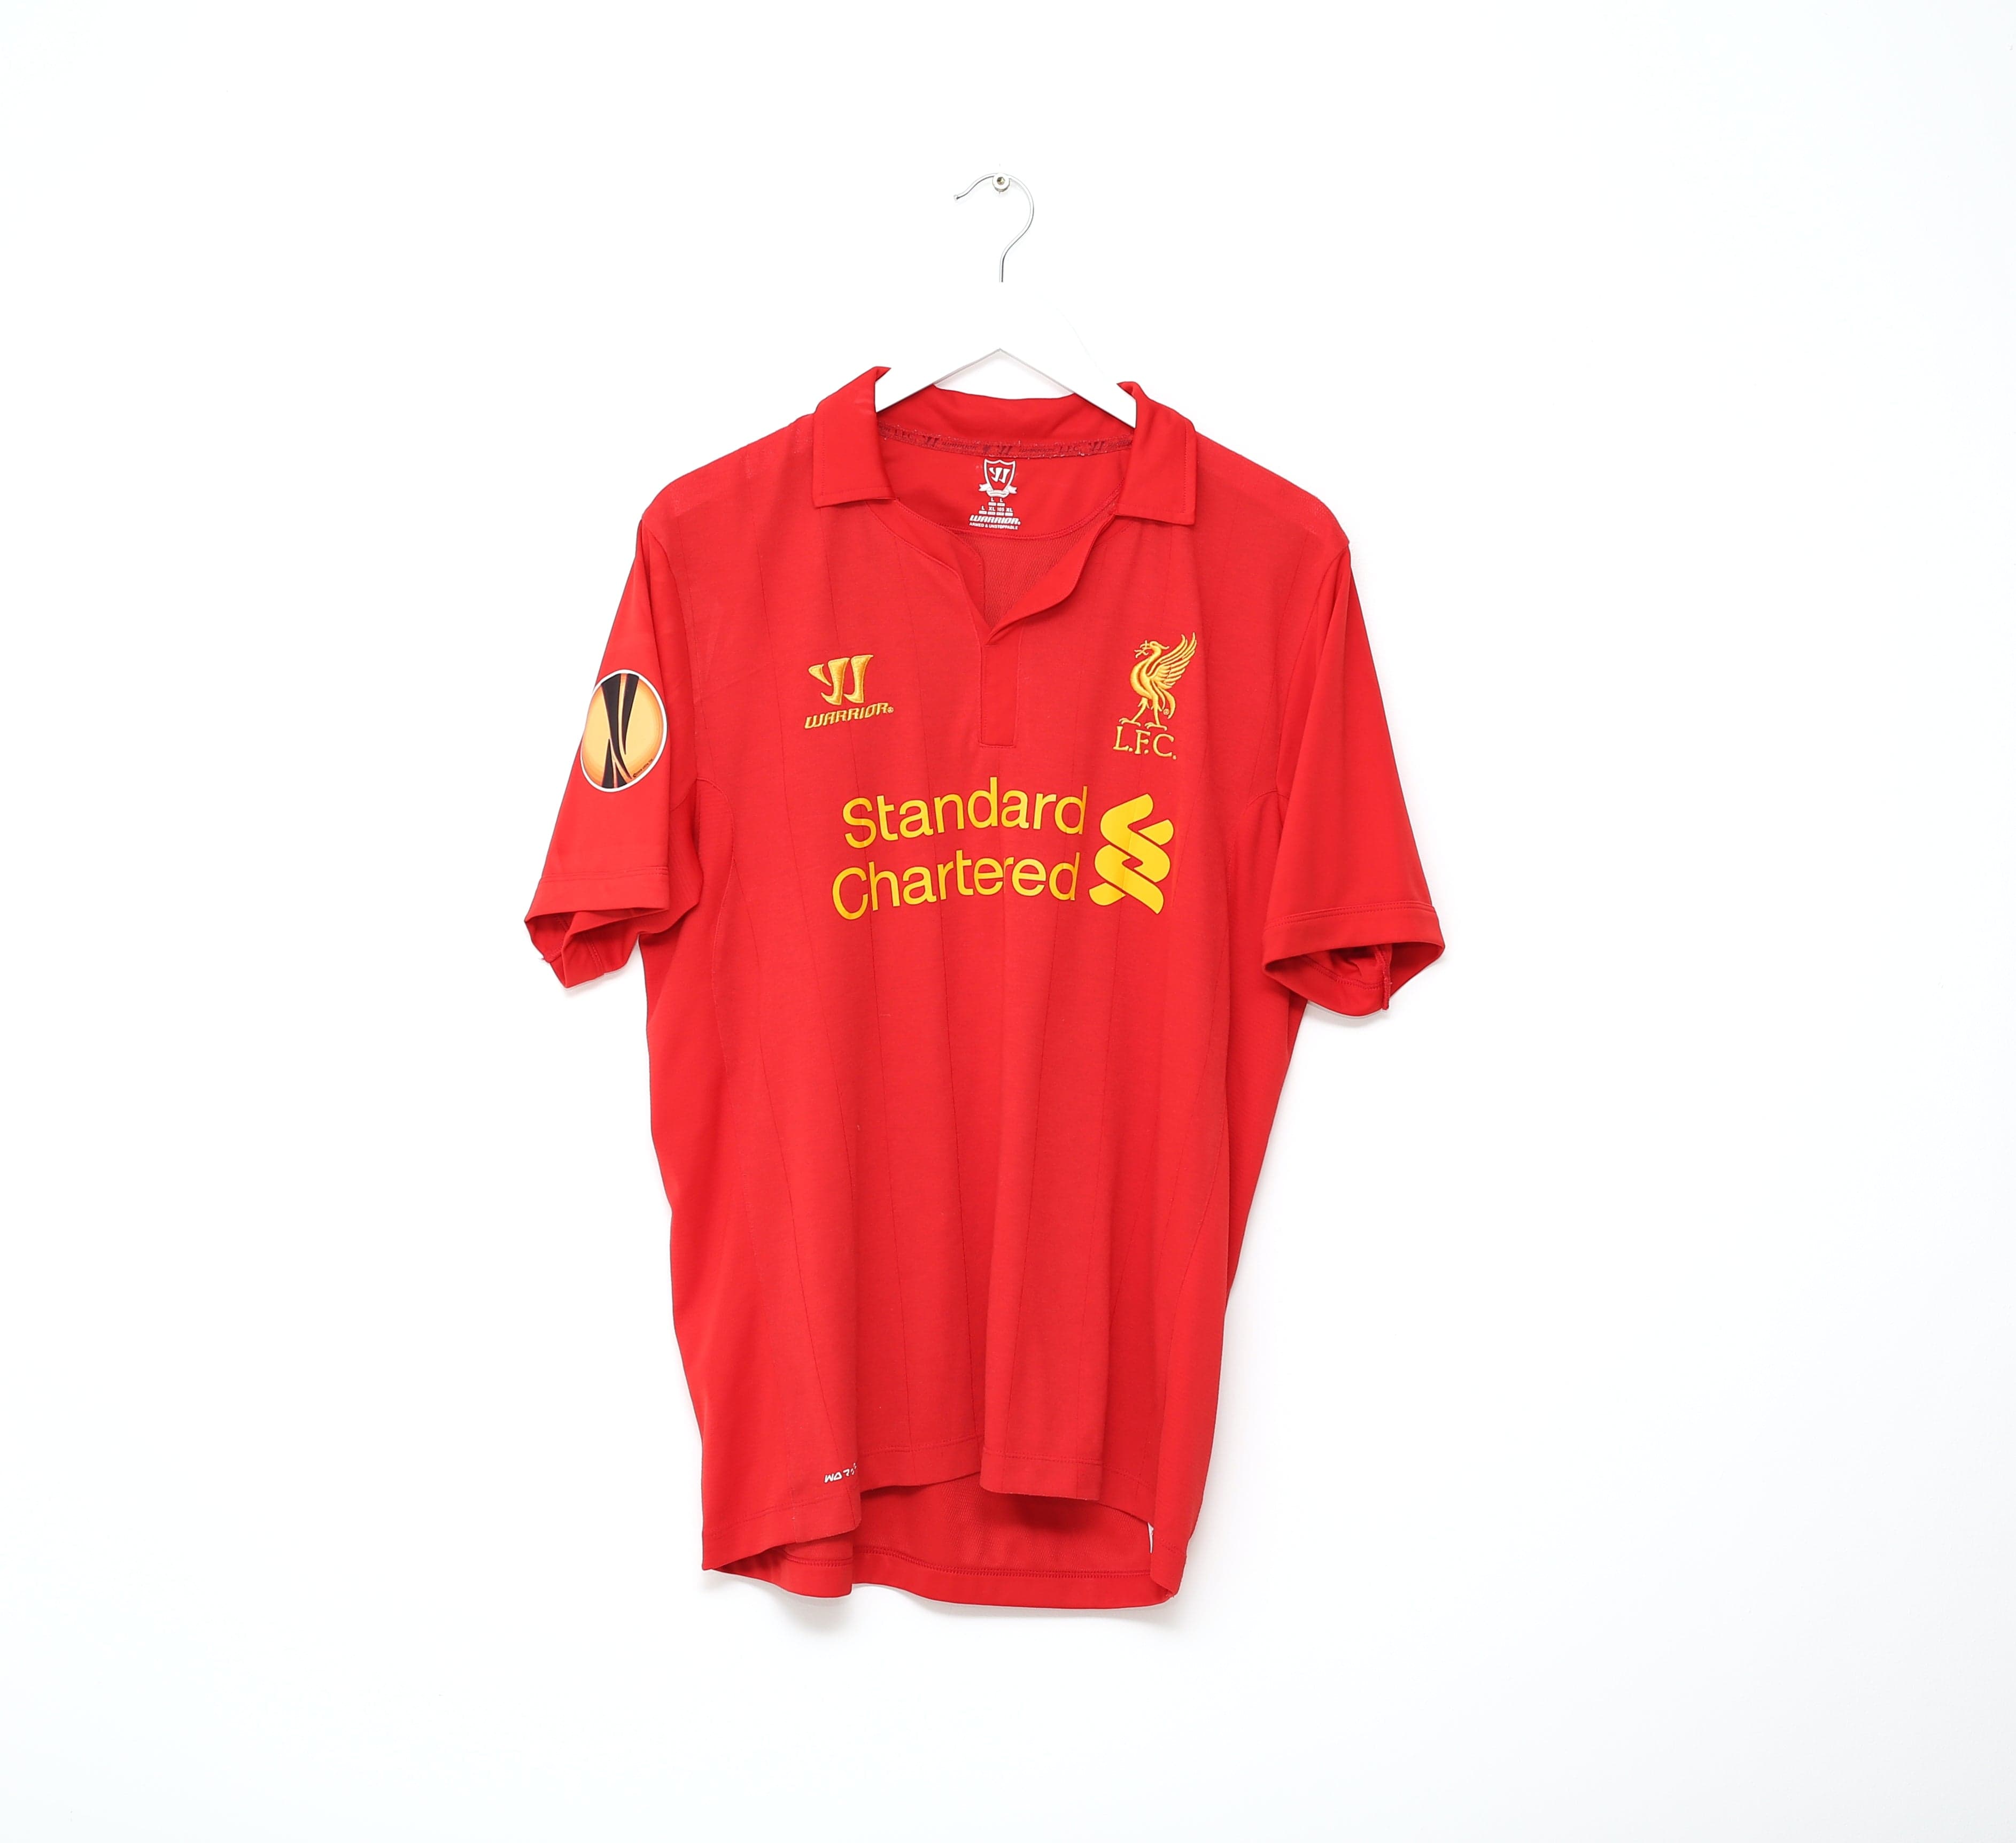 Buy Official 2012-13 Liverpool Home Long Sleeve Football Shirt